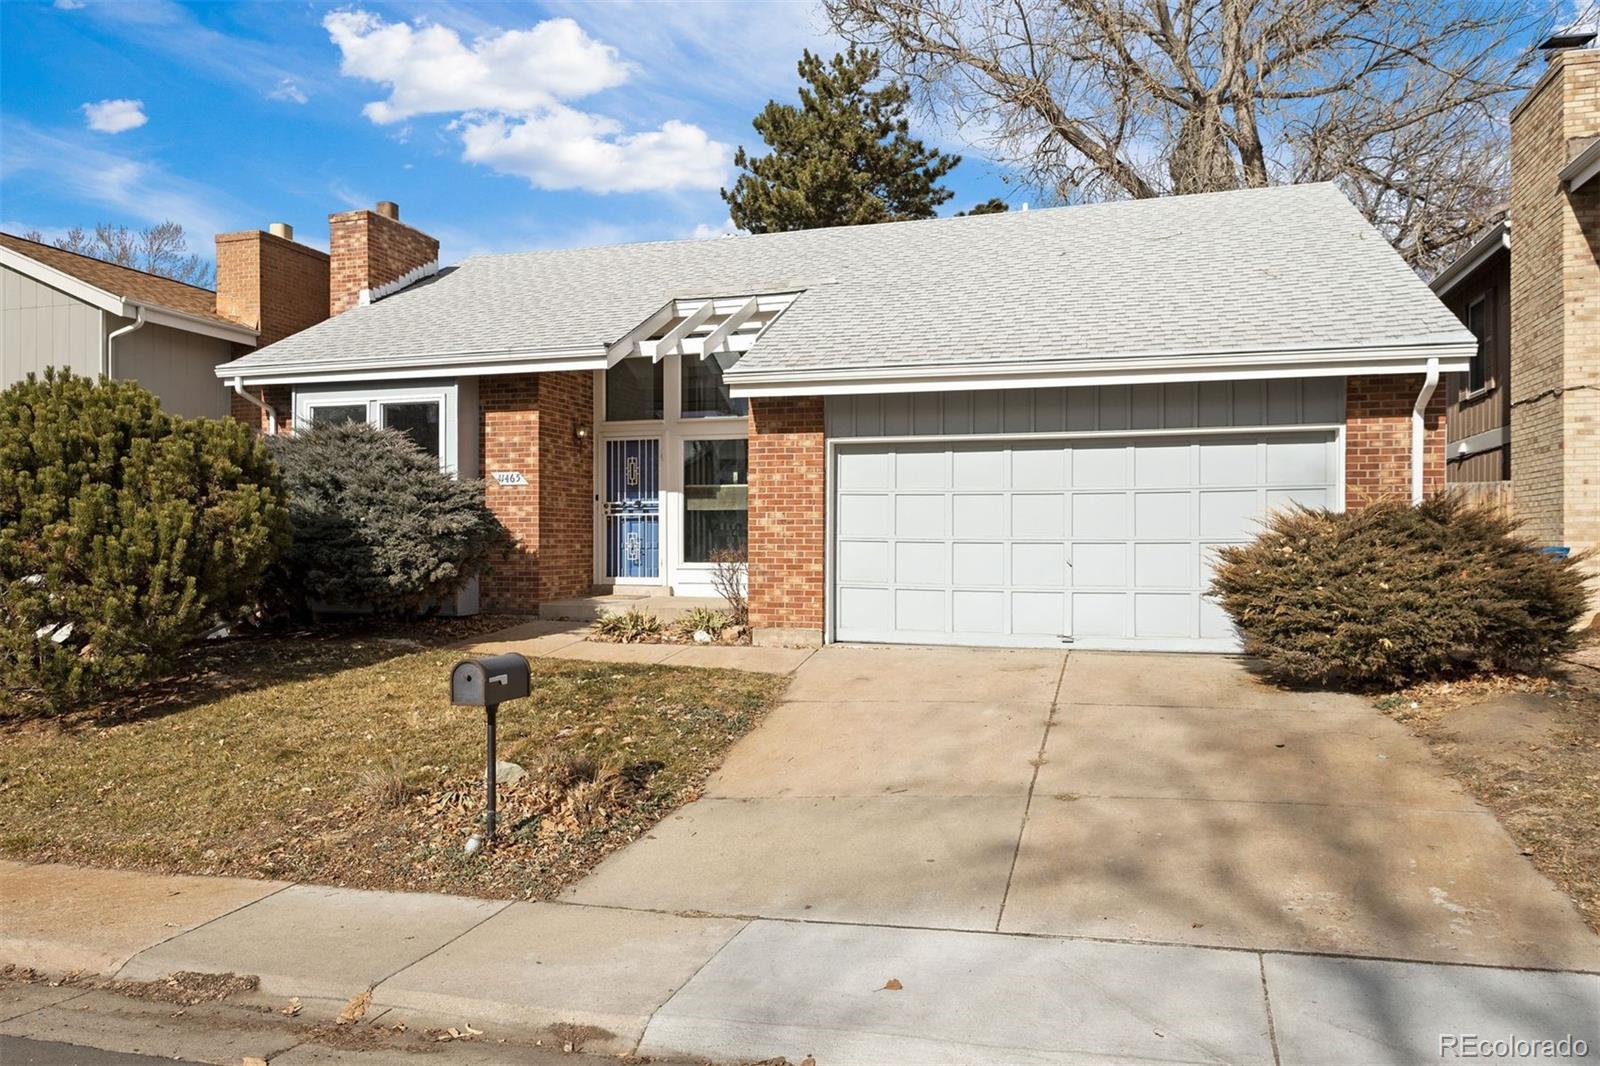 11465 e amherst circle, aurora sold home. Closed on 2024-03-06 for $460,000.